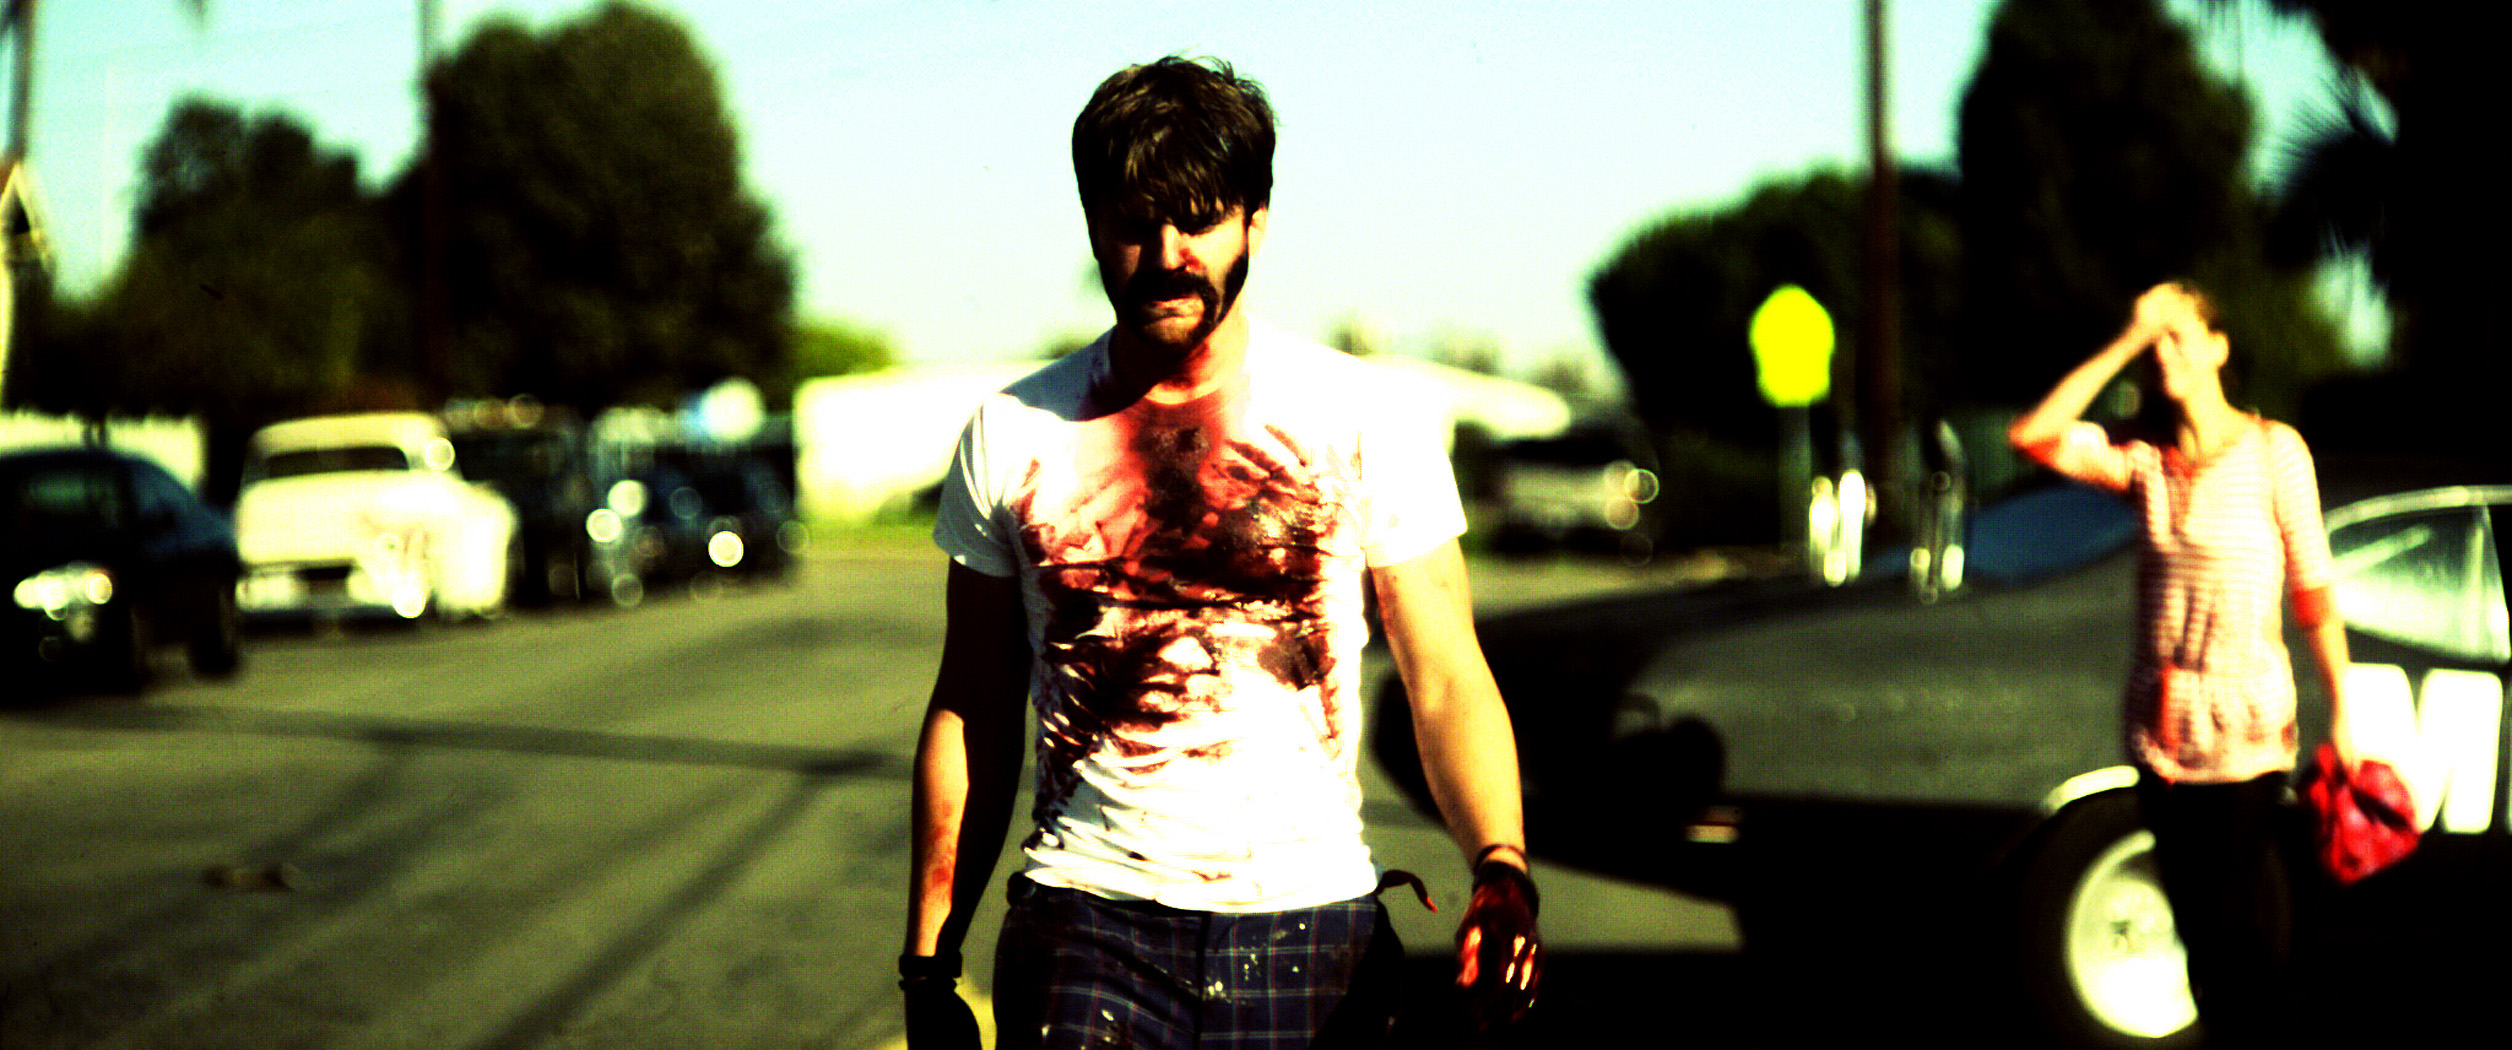 A still from Bellflower. A man with a bloodstained shirt walks down the street away from a woman looking on.